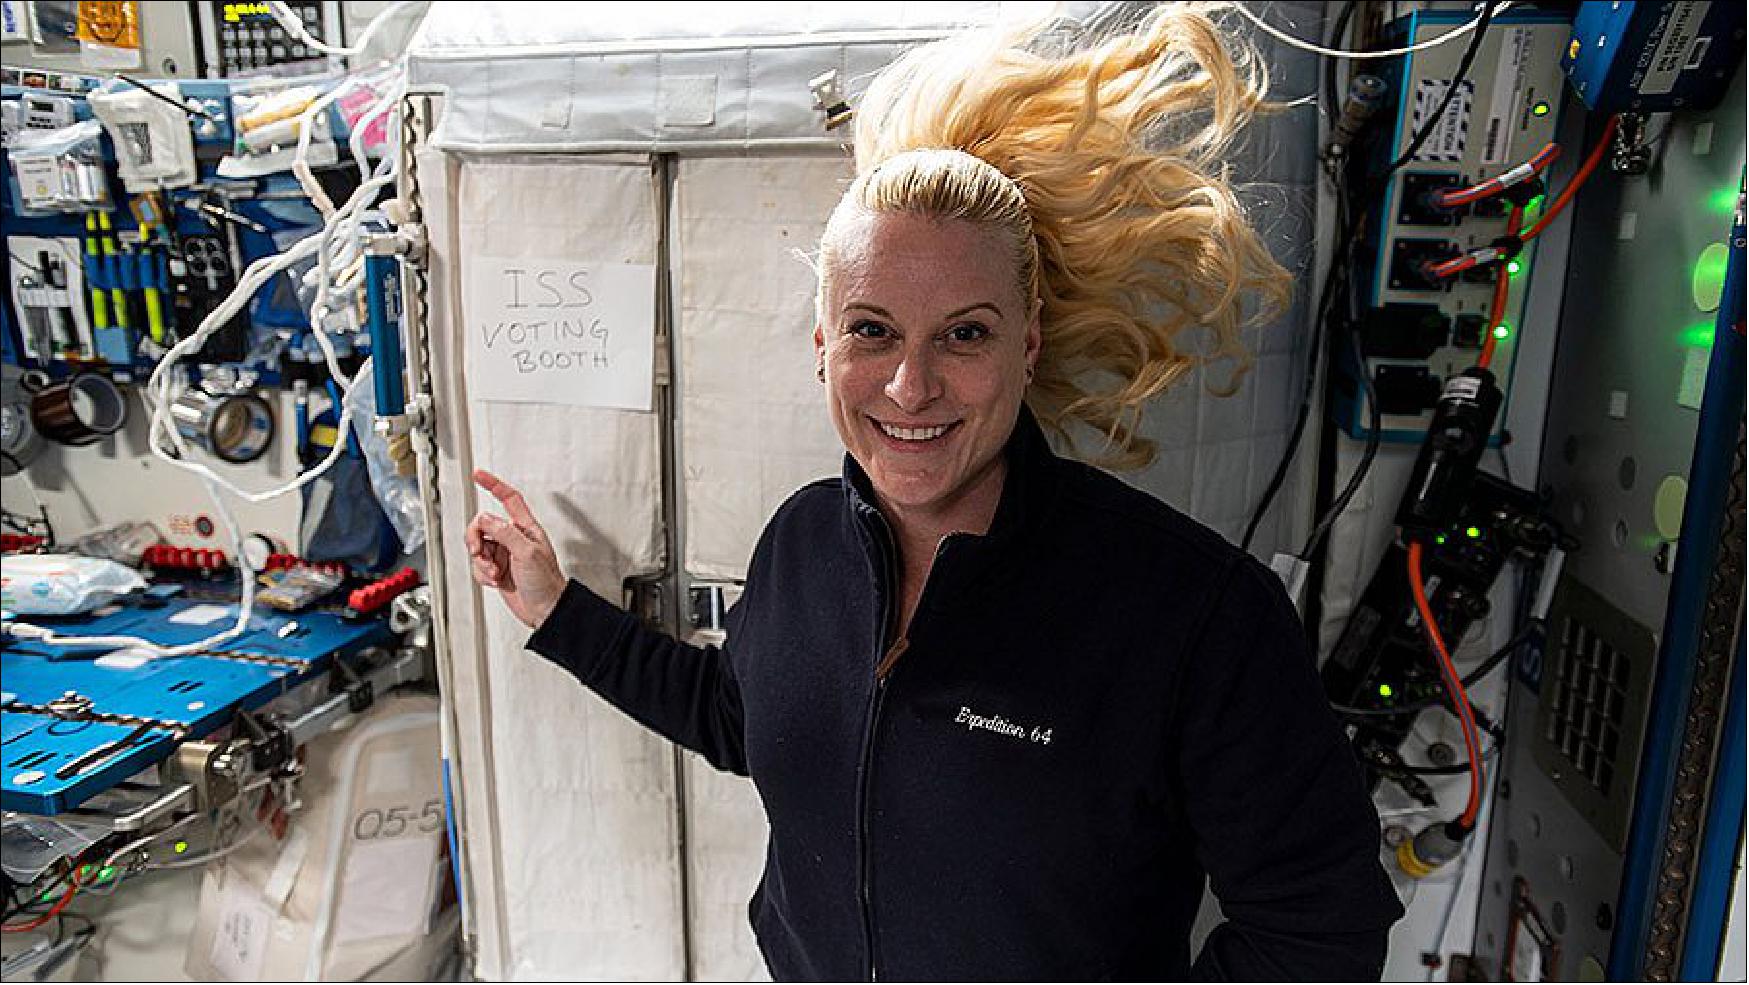 Figure 27: NASA astronaut and Expedition 64 Flight Engineer Kate Rubins points to the International Space Station’s “voting booth” where she cast her vote from space this month (image credit: NASA)